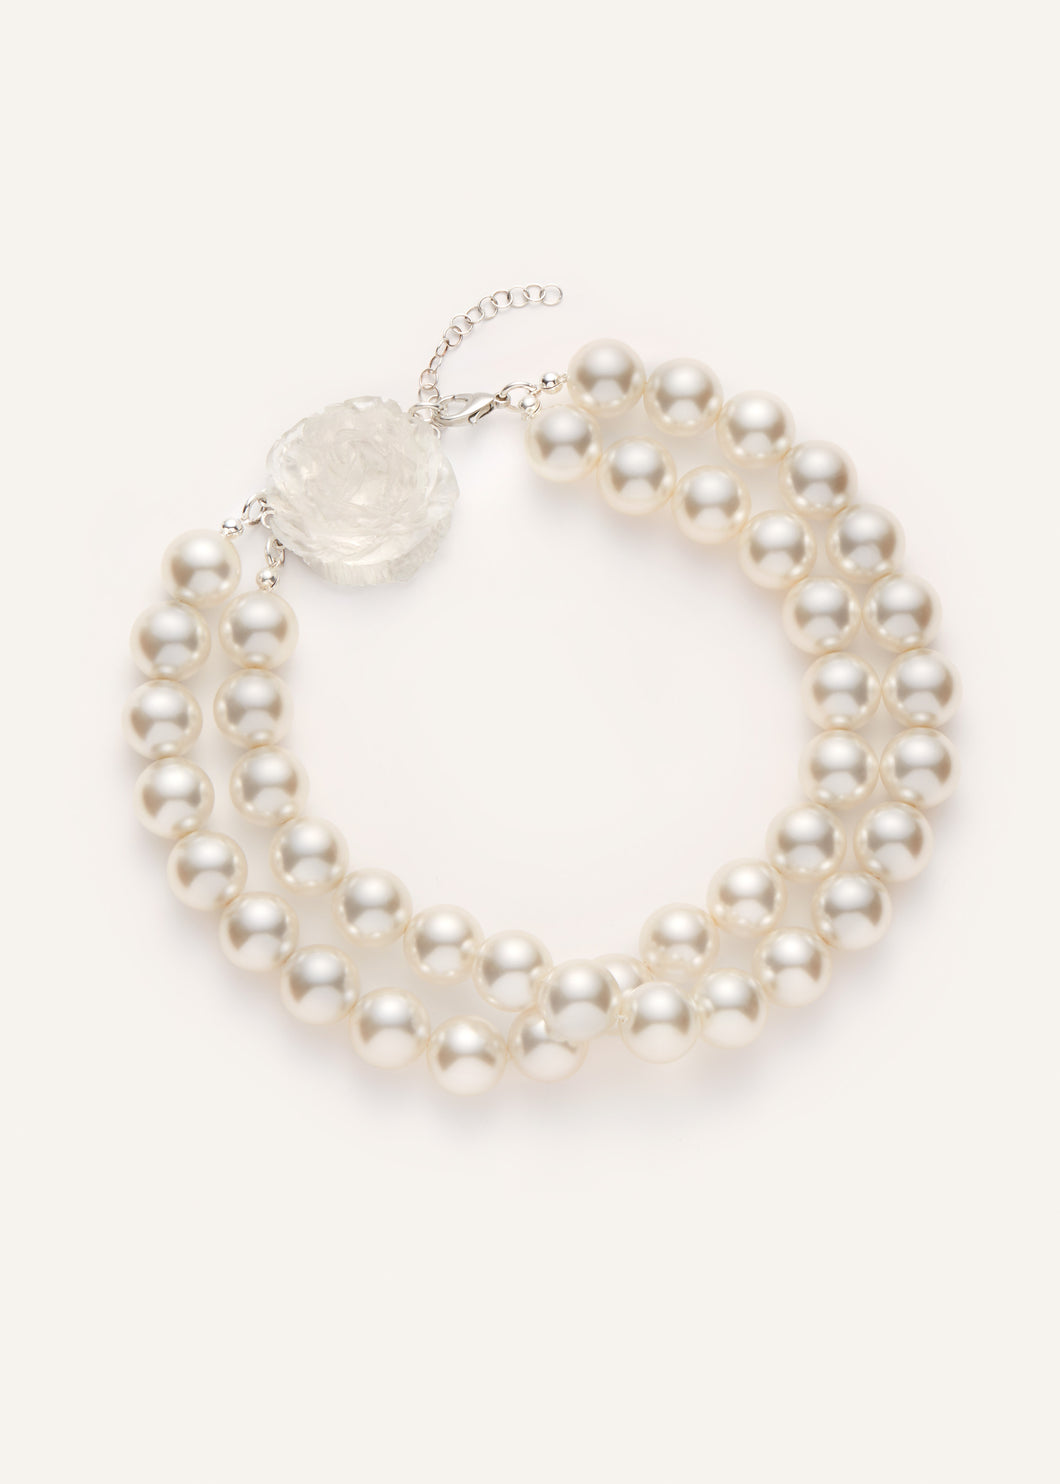 Double pearl choker with rose